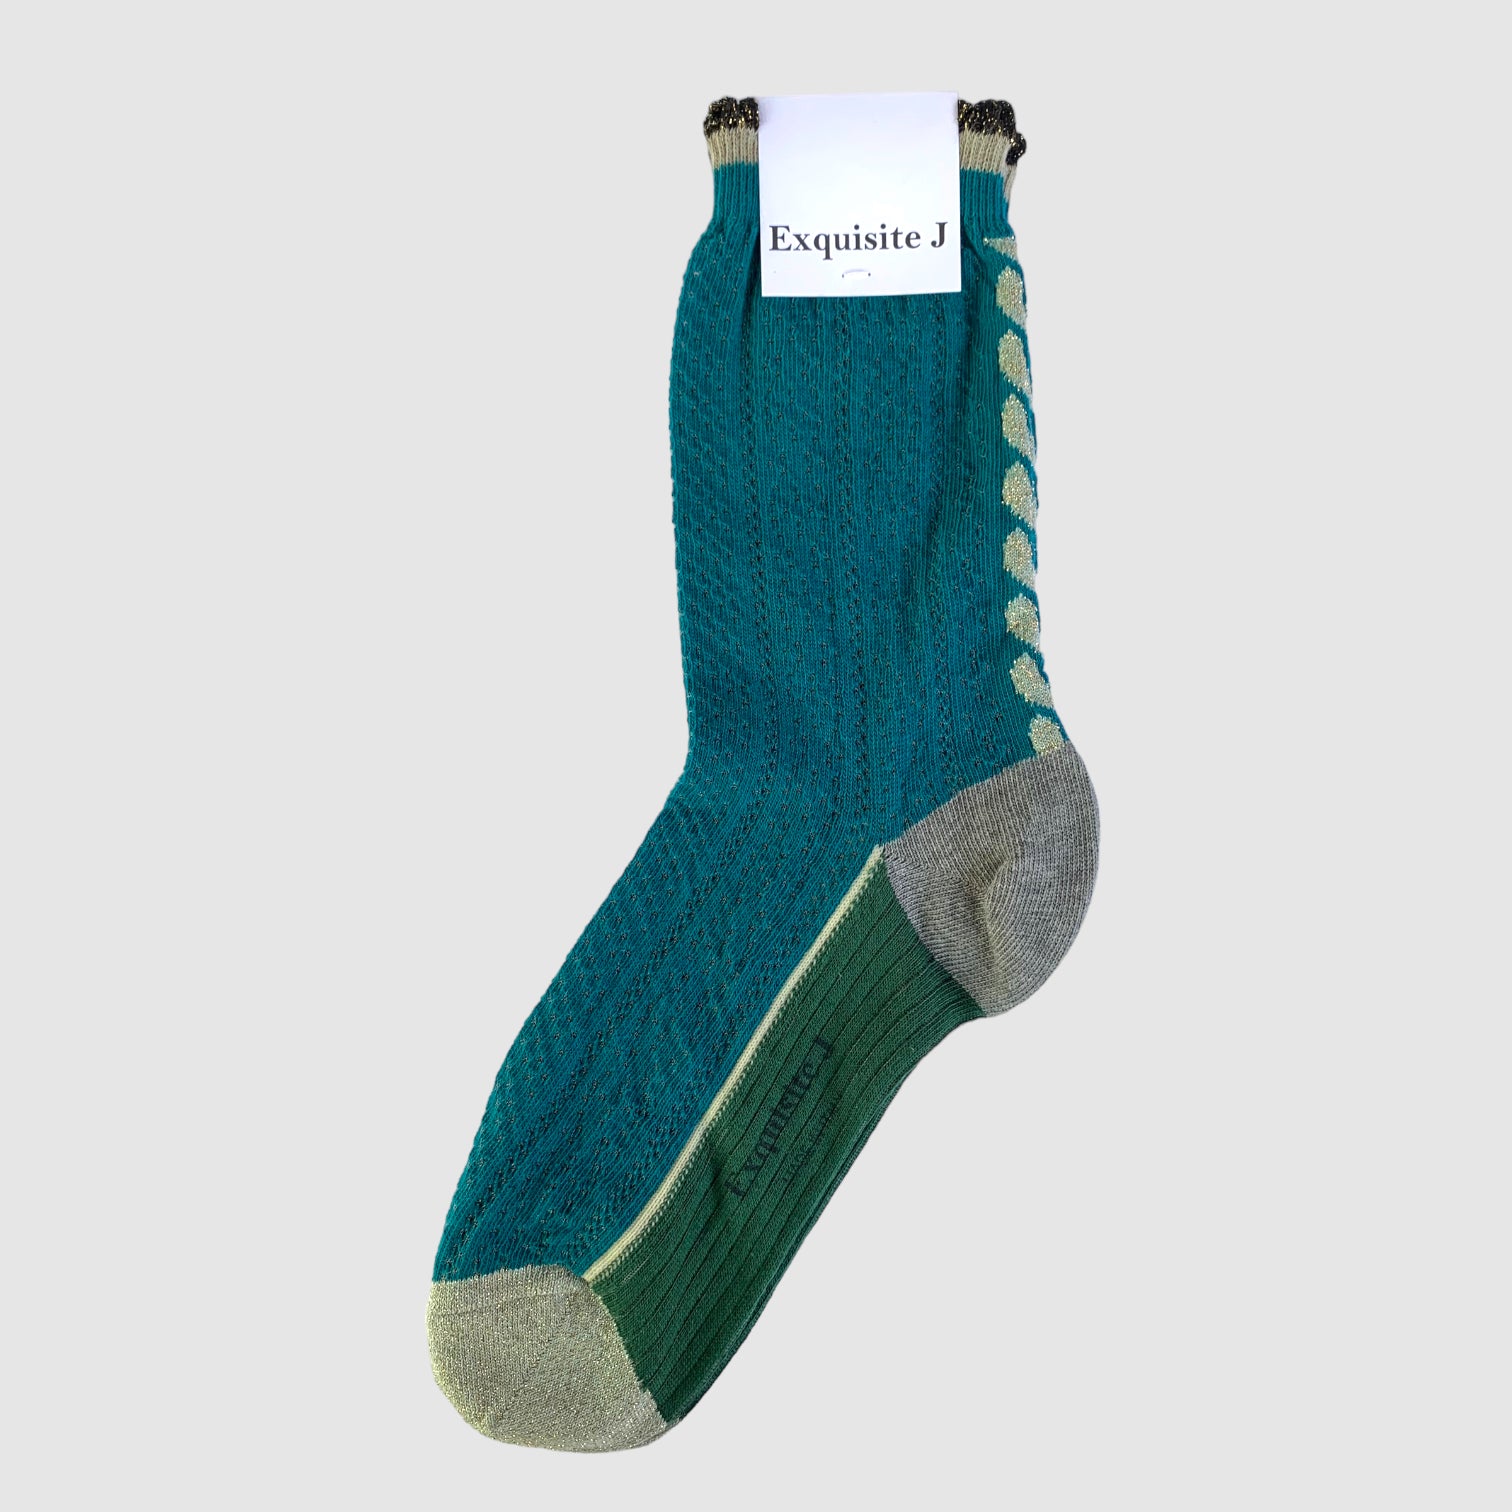 EXQUISITE J SOCKS // PIPPY HOBBY // TEAL